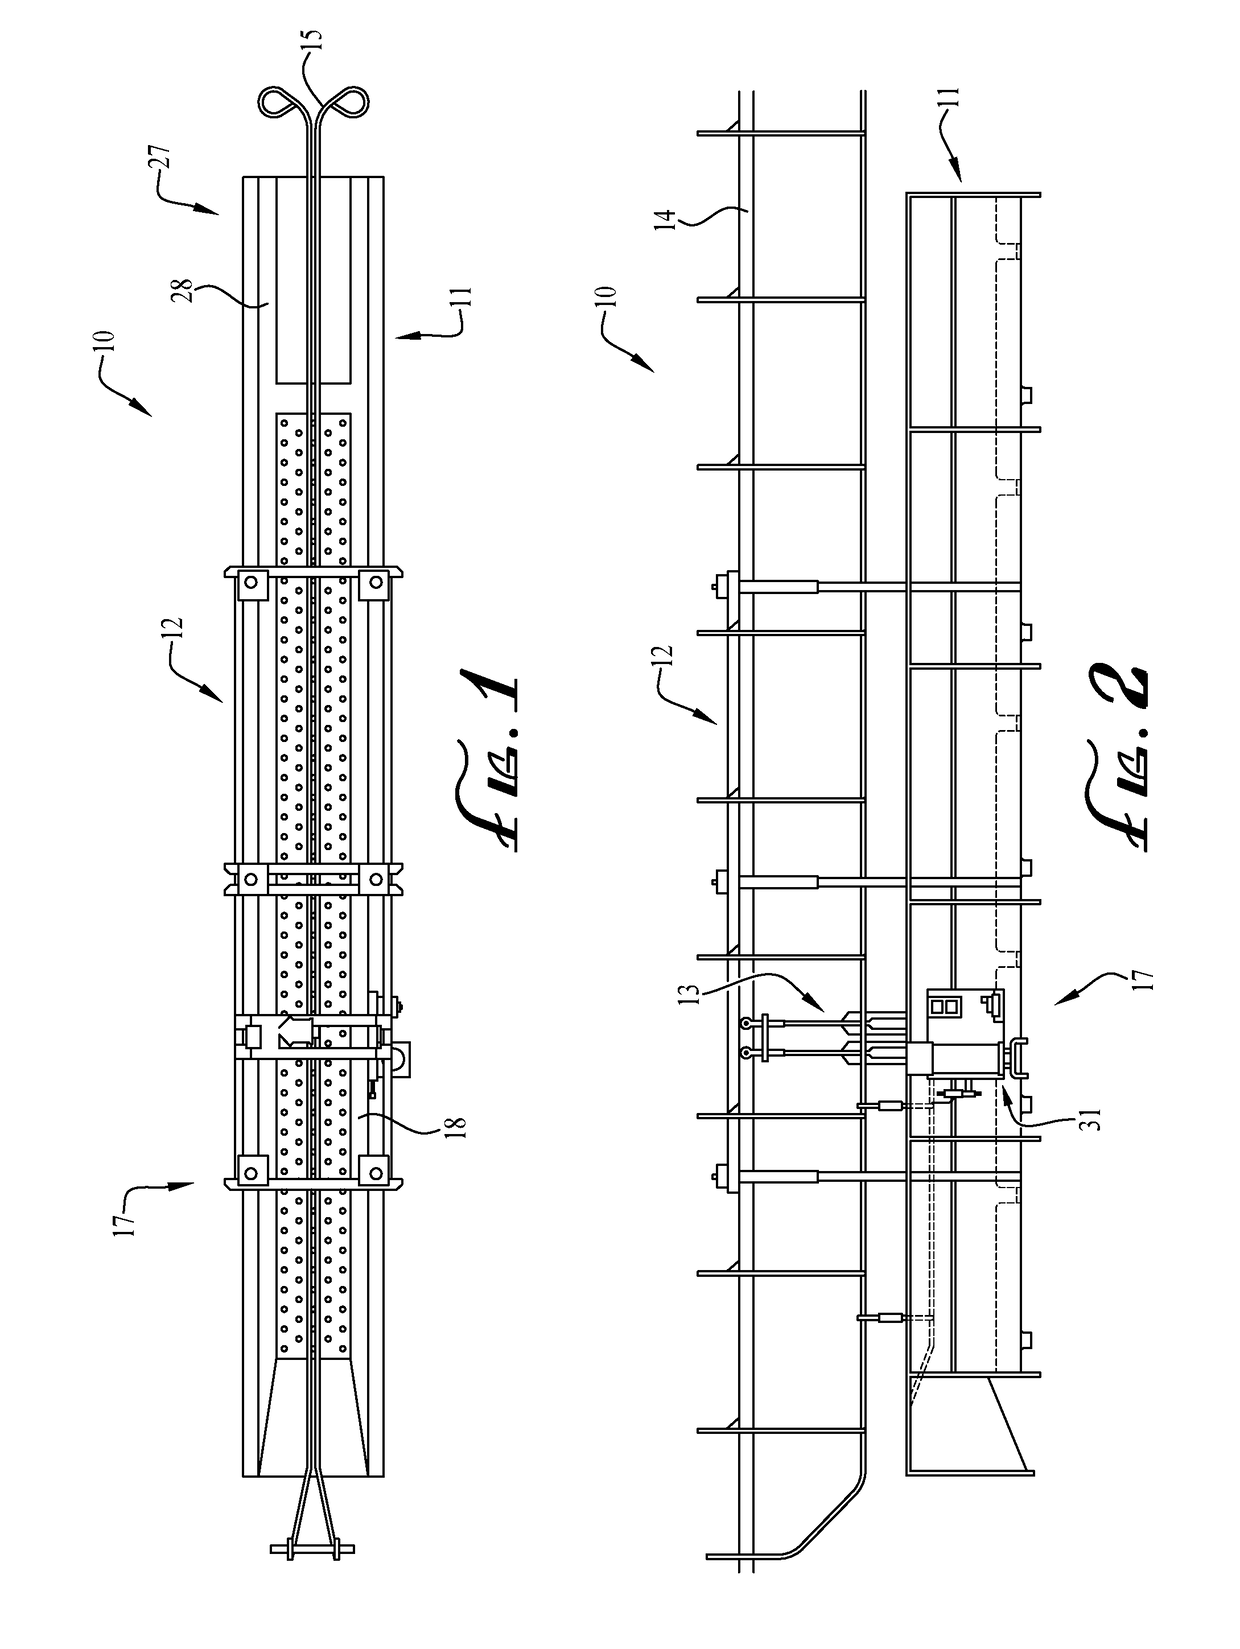 Direct current/alternating current poultry stunning and immobilizing apparatus and method